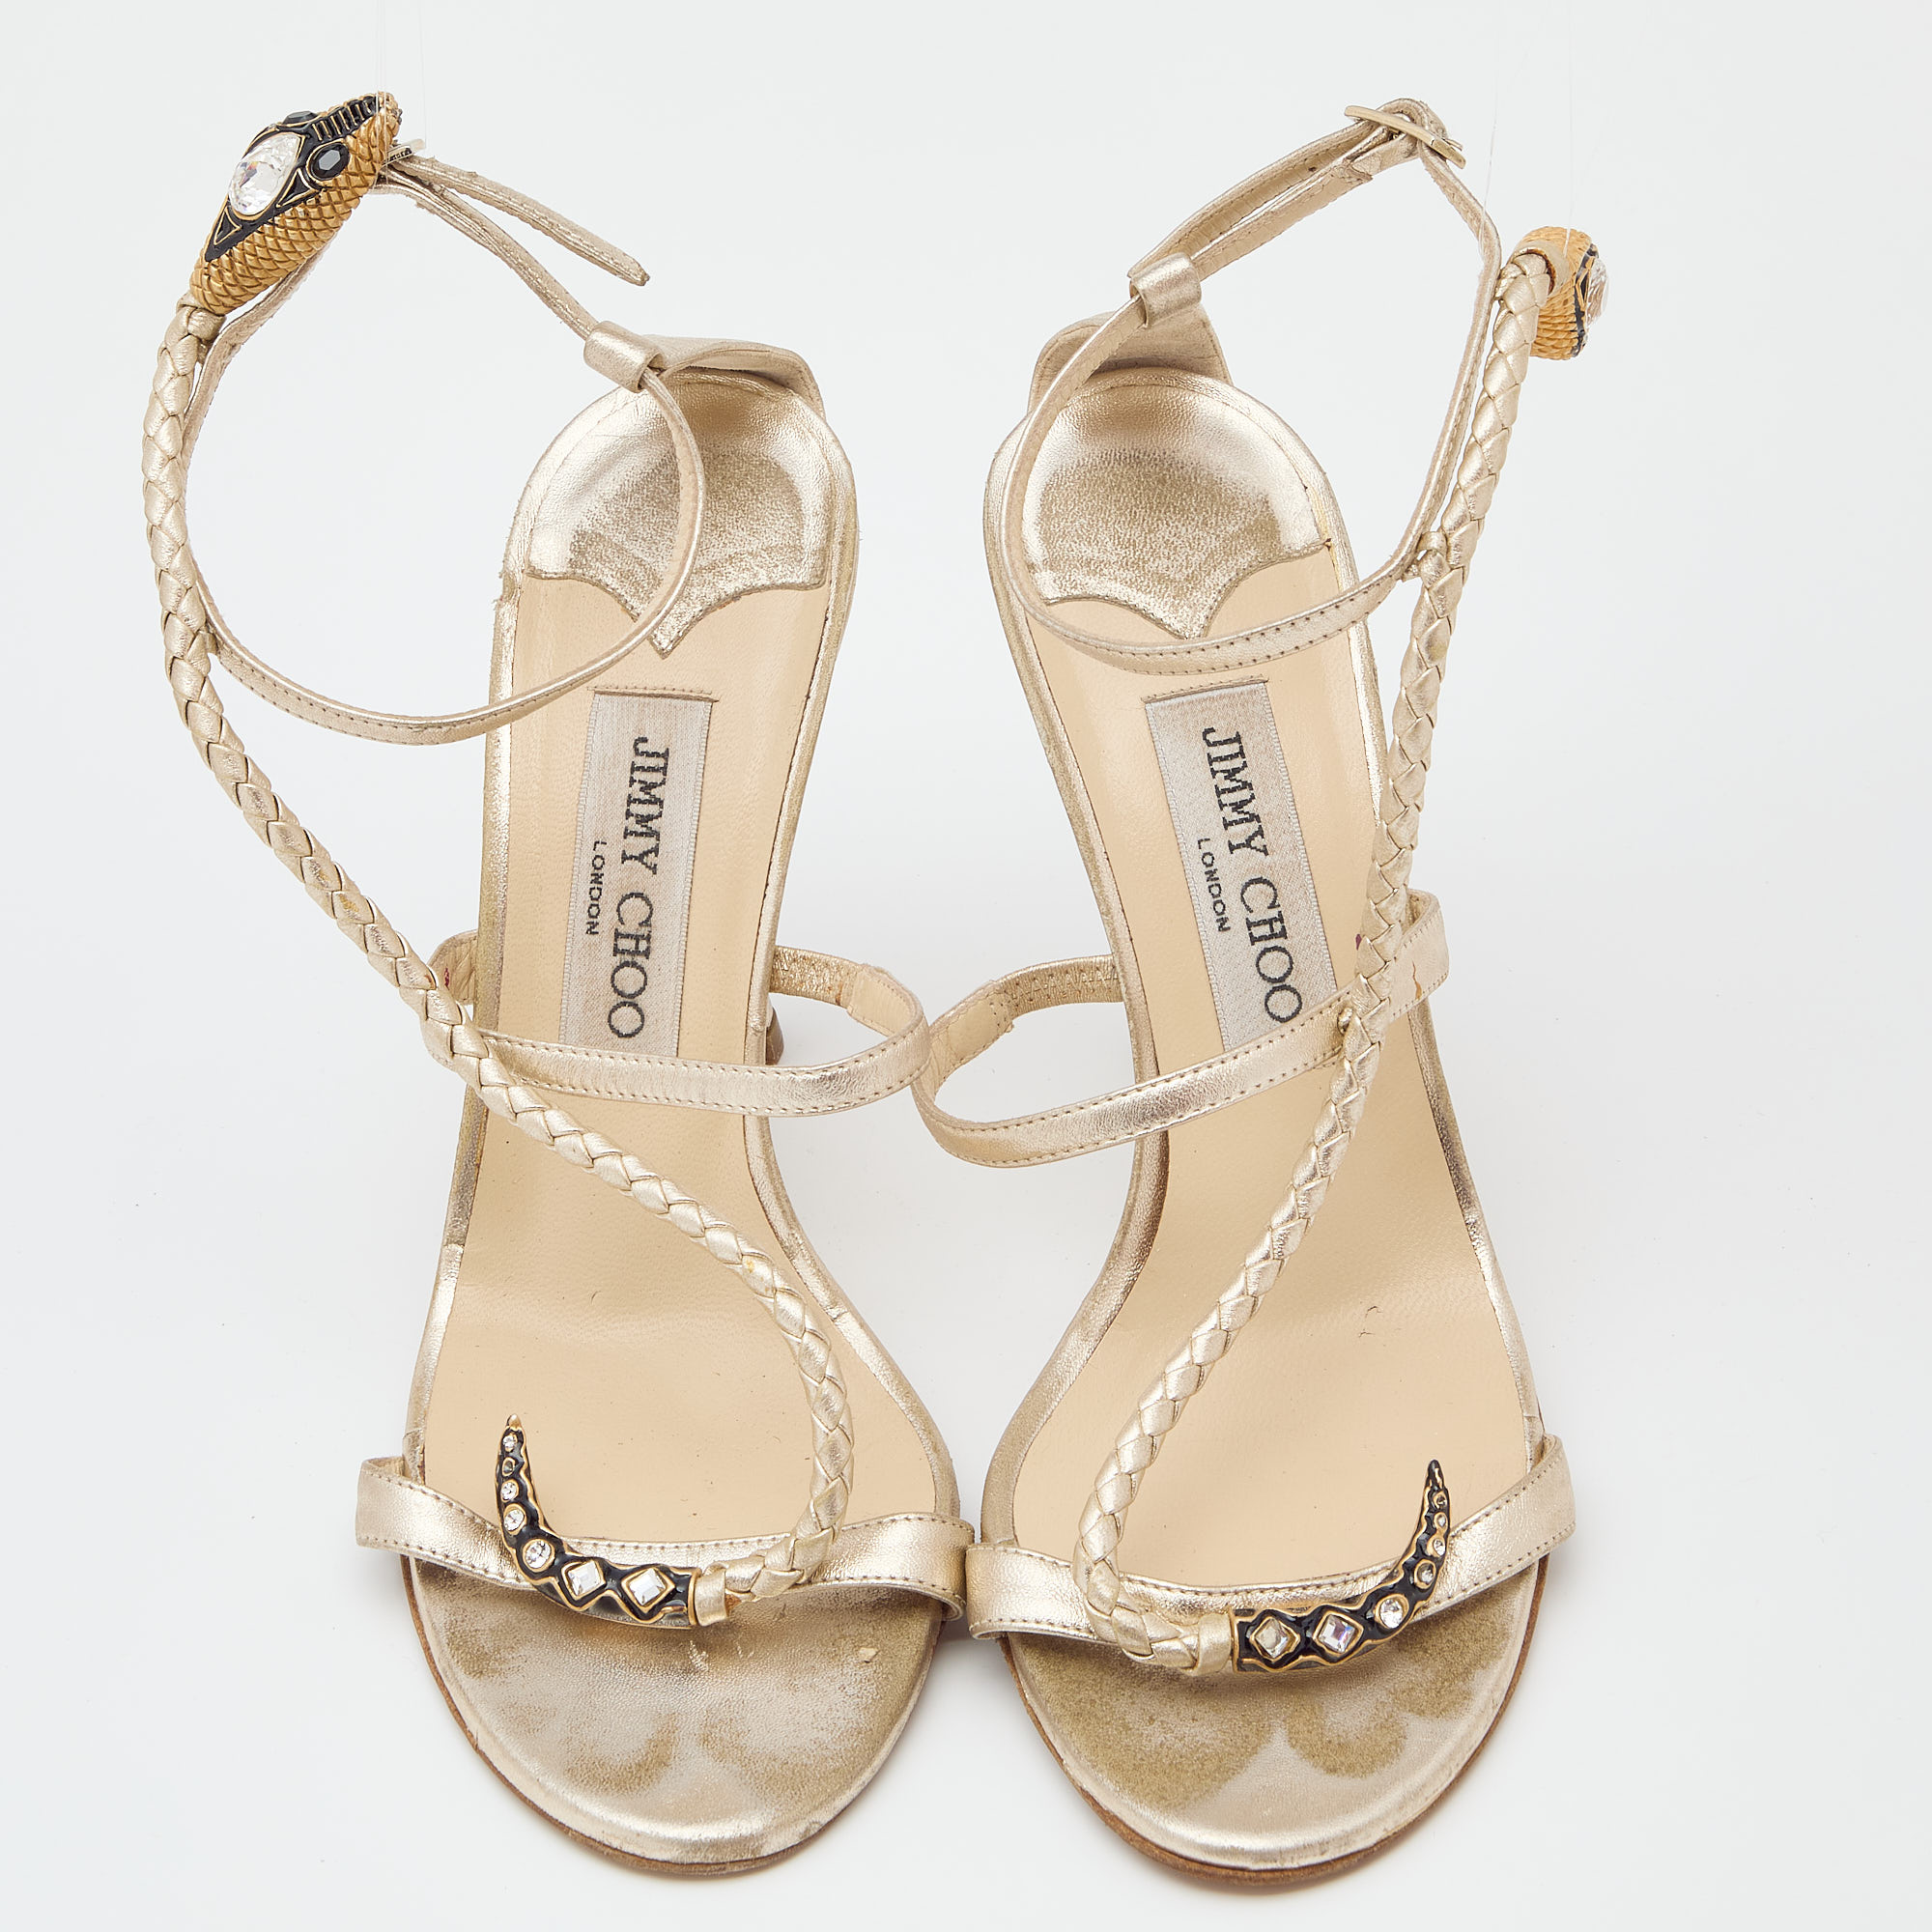 Jimmy Choo Metallic Gold Leather Leather Snake Embossed Ankle Strap Sandals Size 38